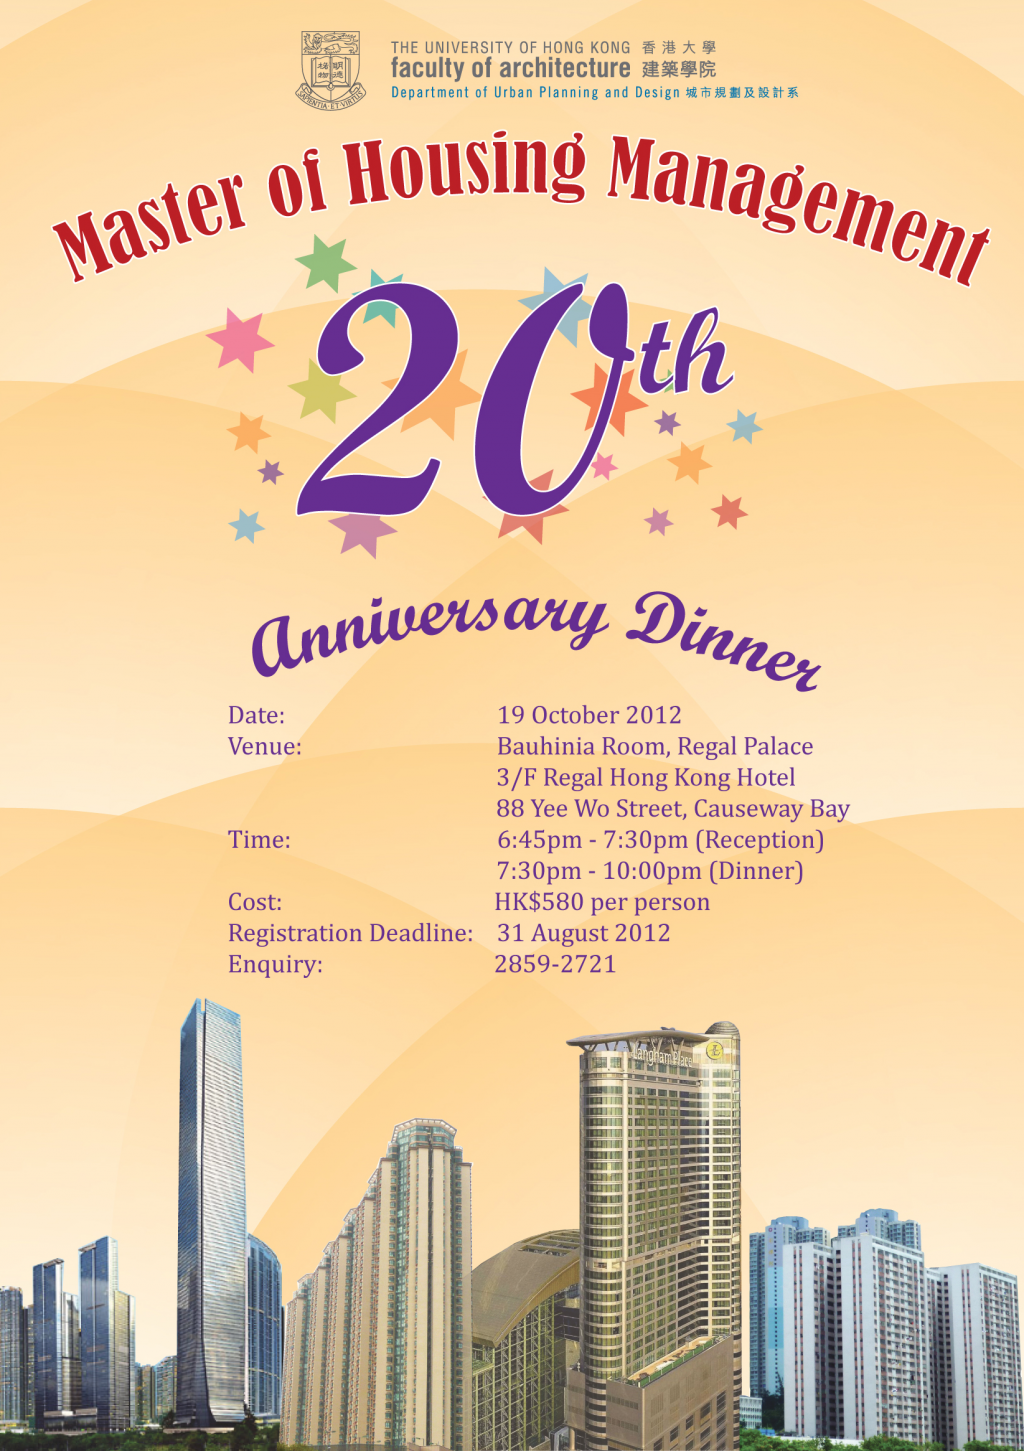 20th Anniversary Celebration of the Master of Housing Management